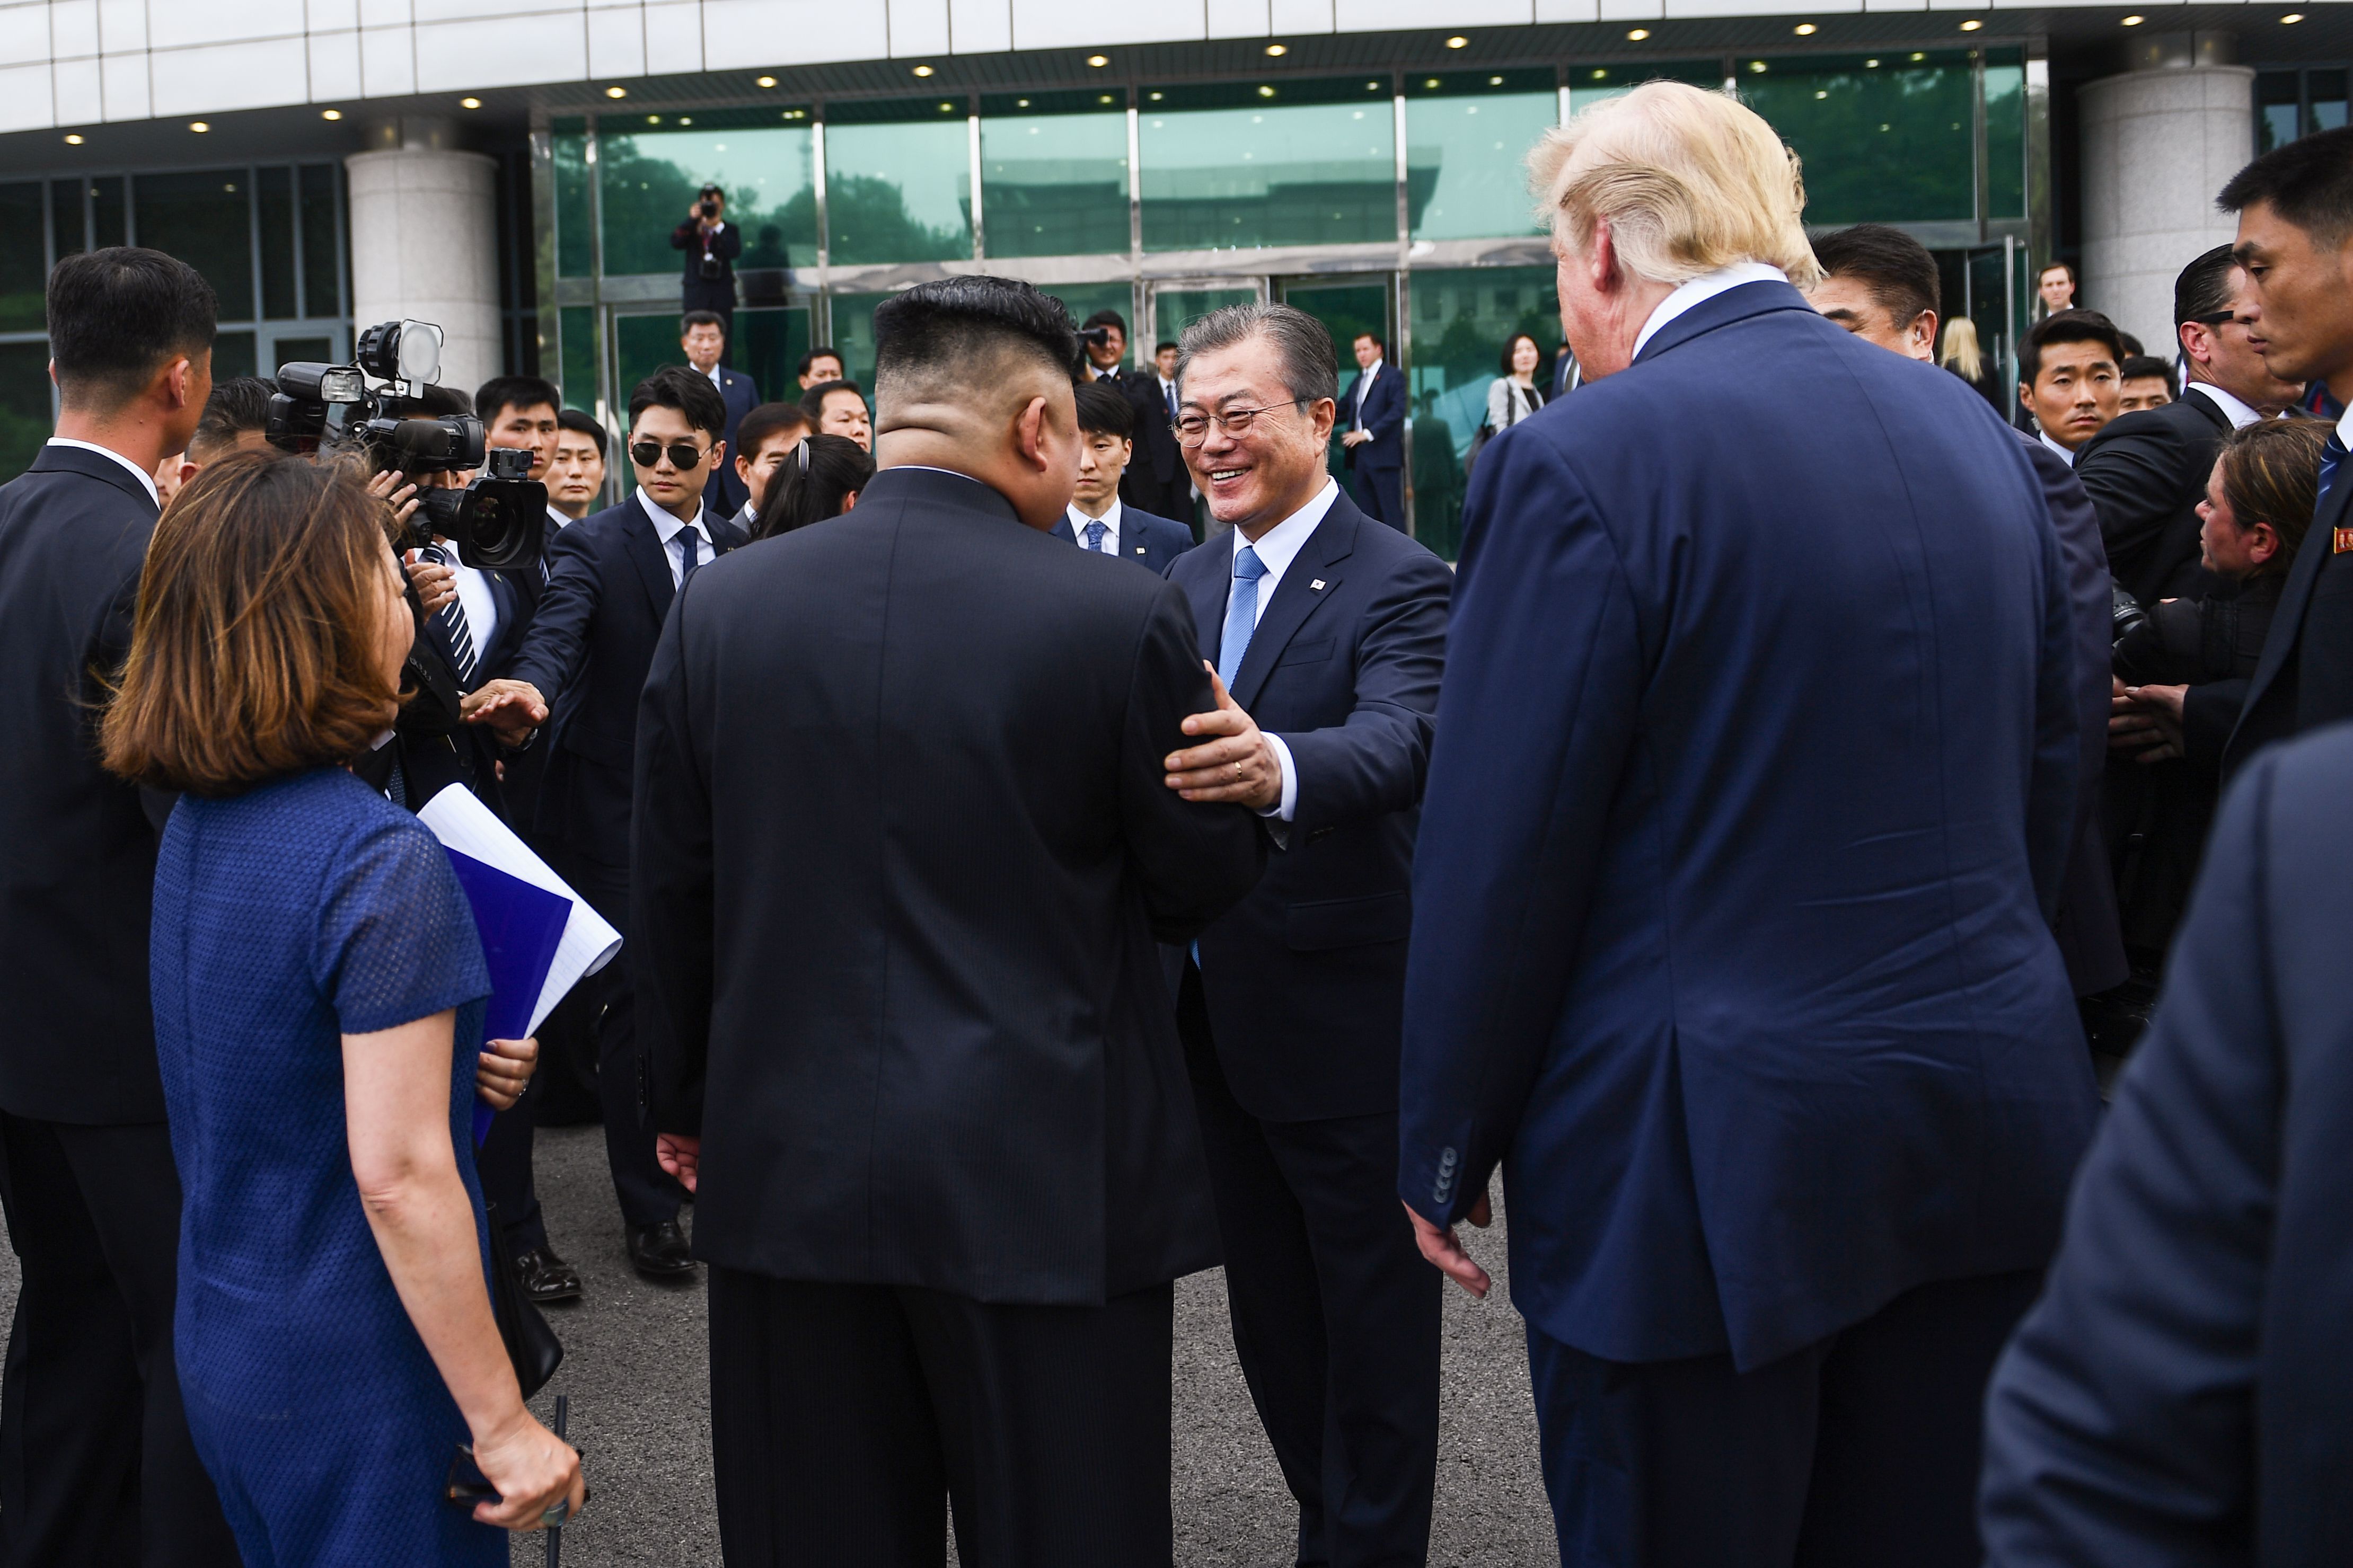  North Korea's leader Kim Jong Un (centre L) meets with South Korea's President Moon Jae-in (C) as US President Donald Trump (centre R) looks on at the DMZ.